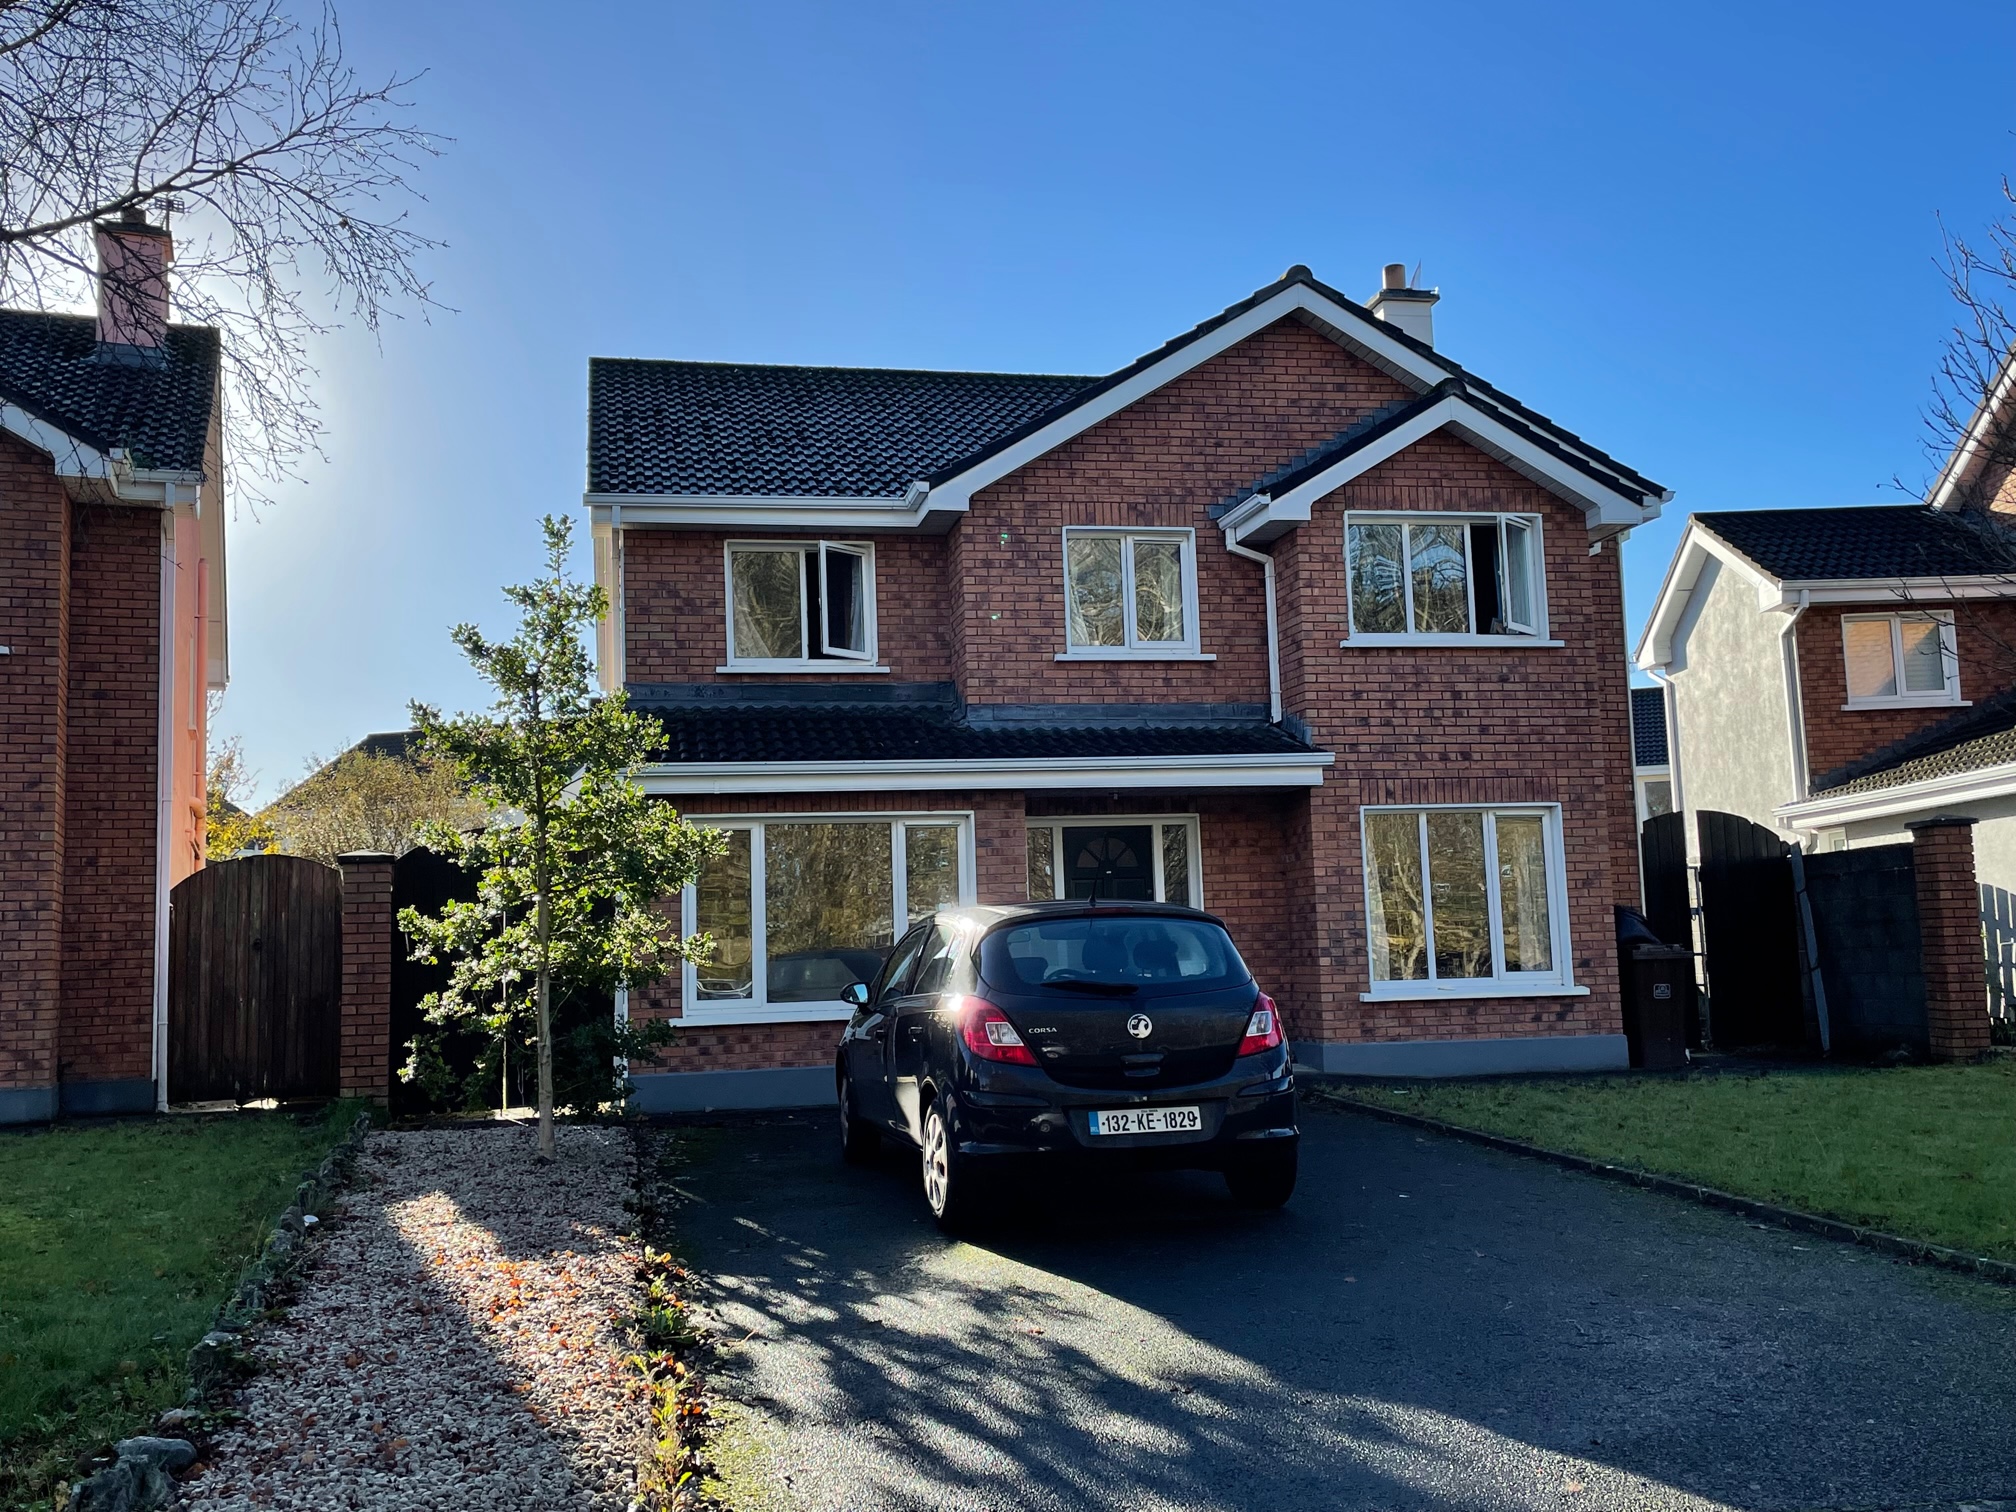 164 Bluebell Woods, Maree Road, Oranmore, Co Galway, H91 Y3XV